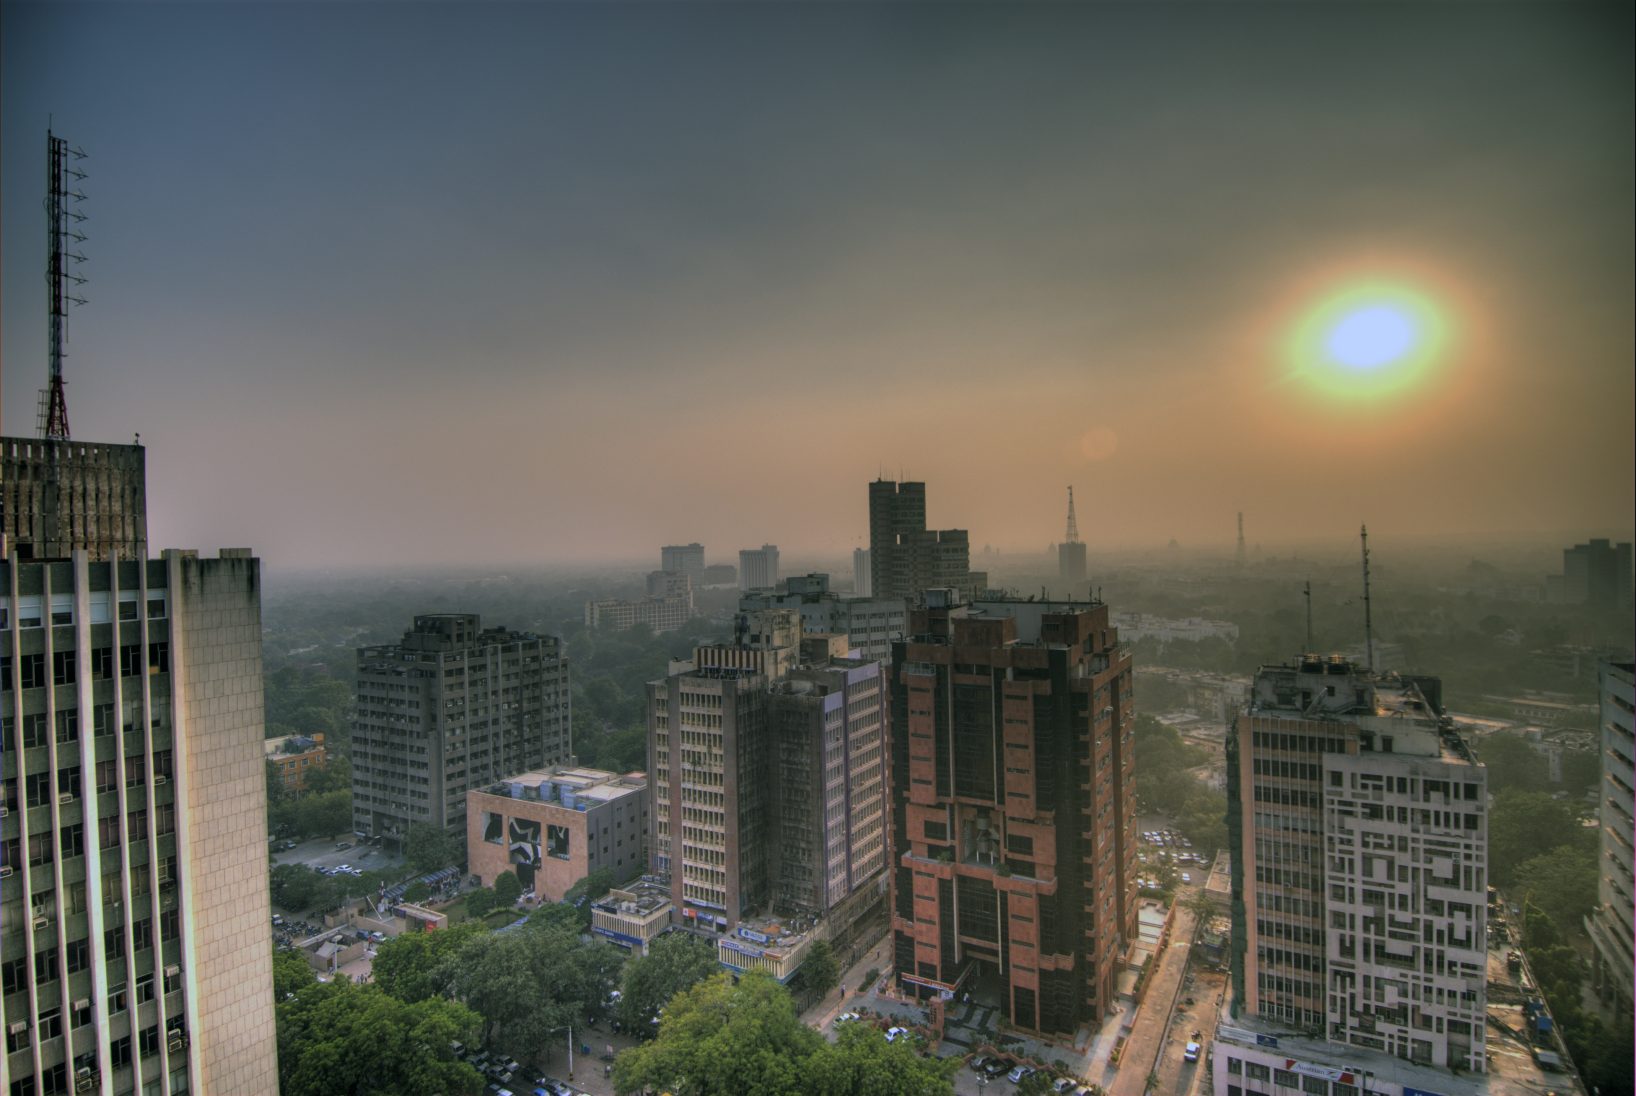 Smog In The Skies Of Delhi, India. Photo by Ville Miettinen. Source: https://bit.ly/337cB8Y